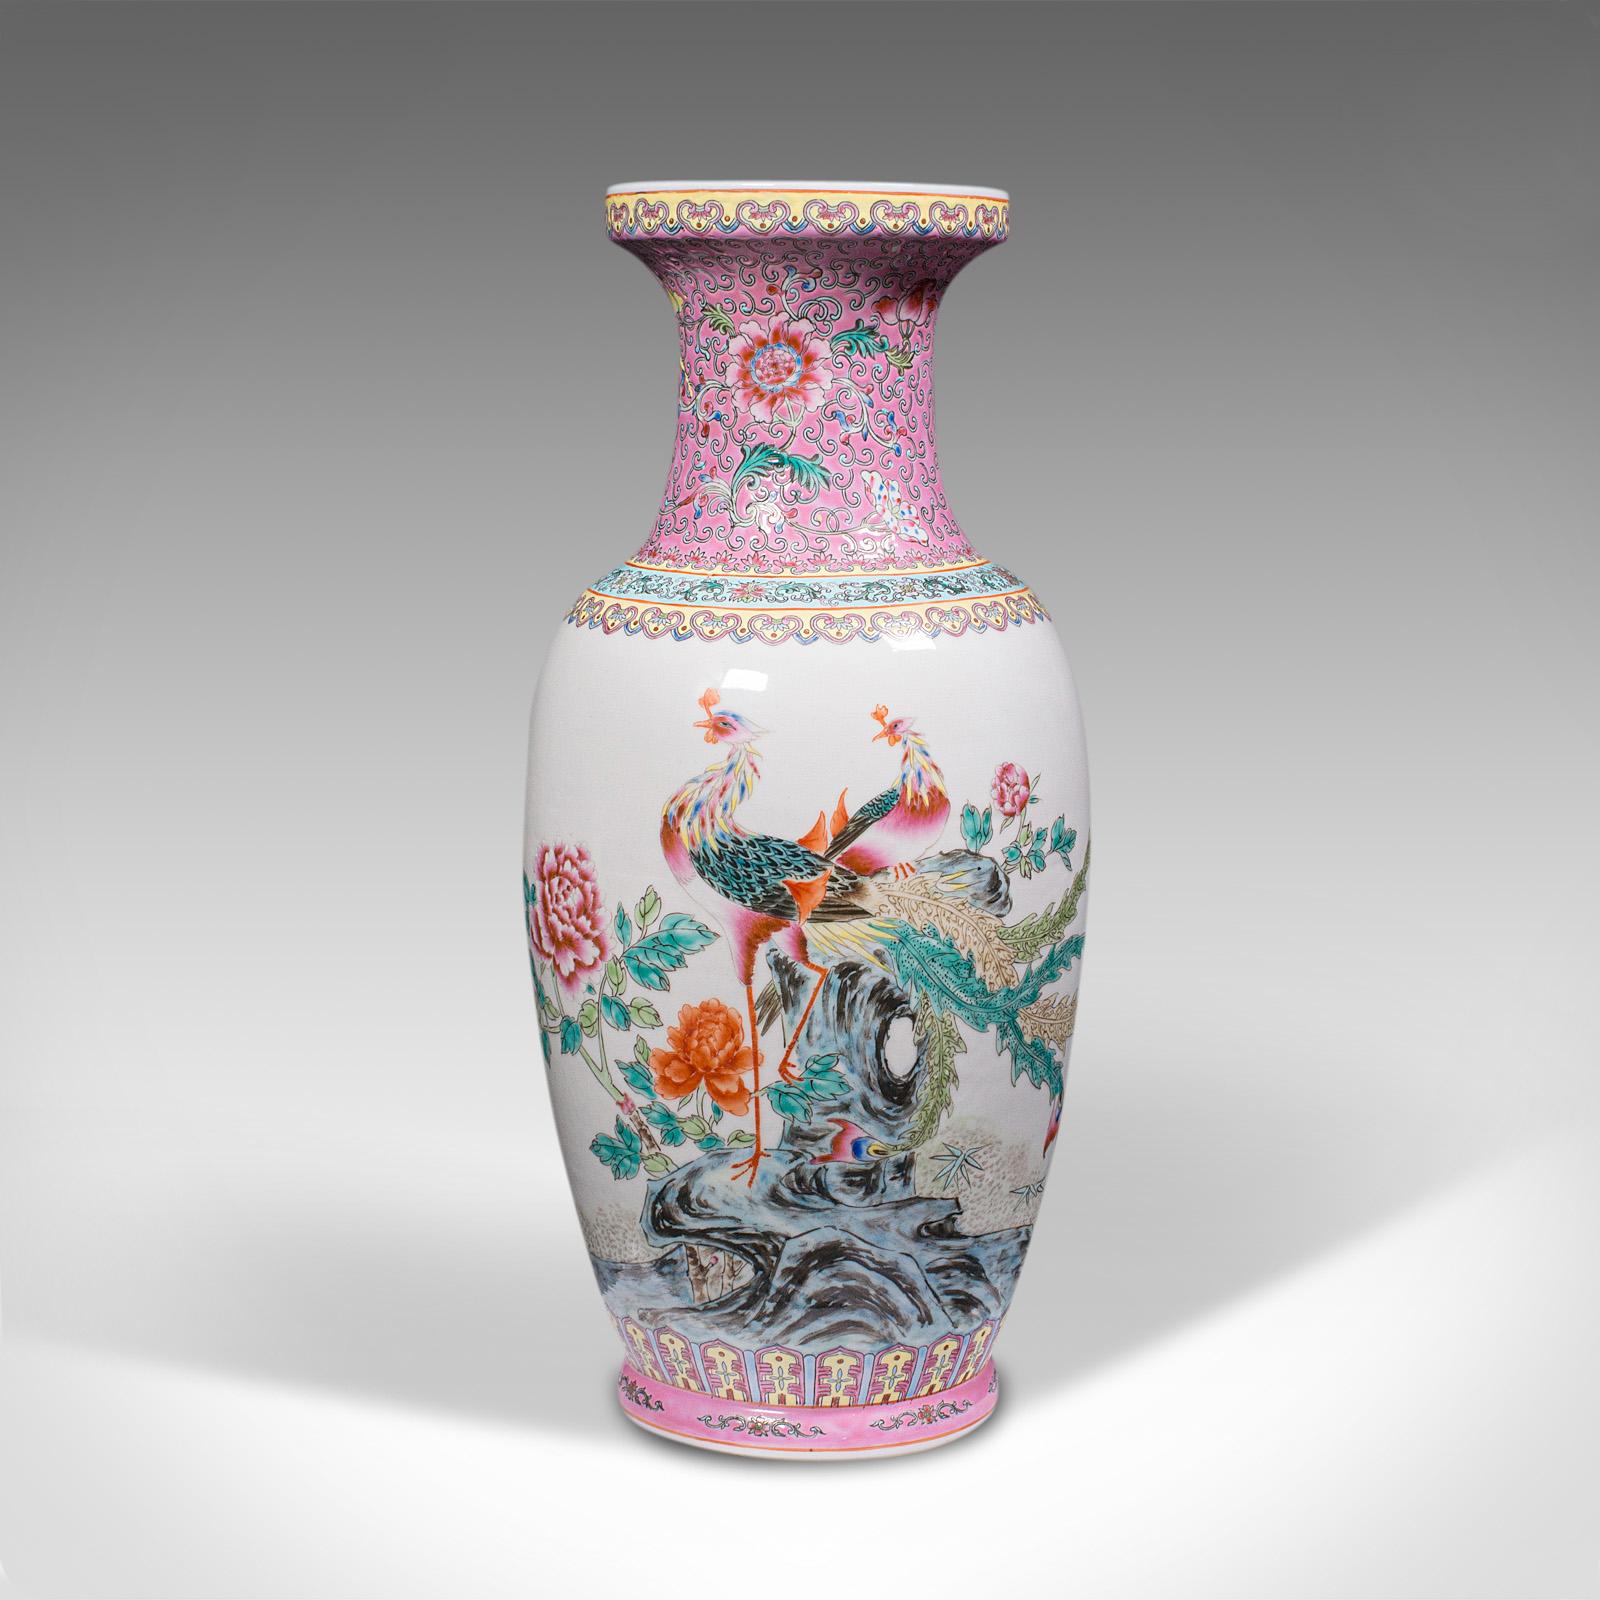 This is a tall vintage peacock vase. A Chinese, ceramic baluster urn with Art deco taste, dating to the mid 20th century, circa 1940.

Charmingly colourful, with generous proportion and form
Displays a desirable aged patina and in good